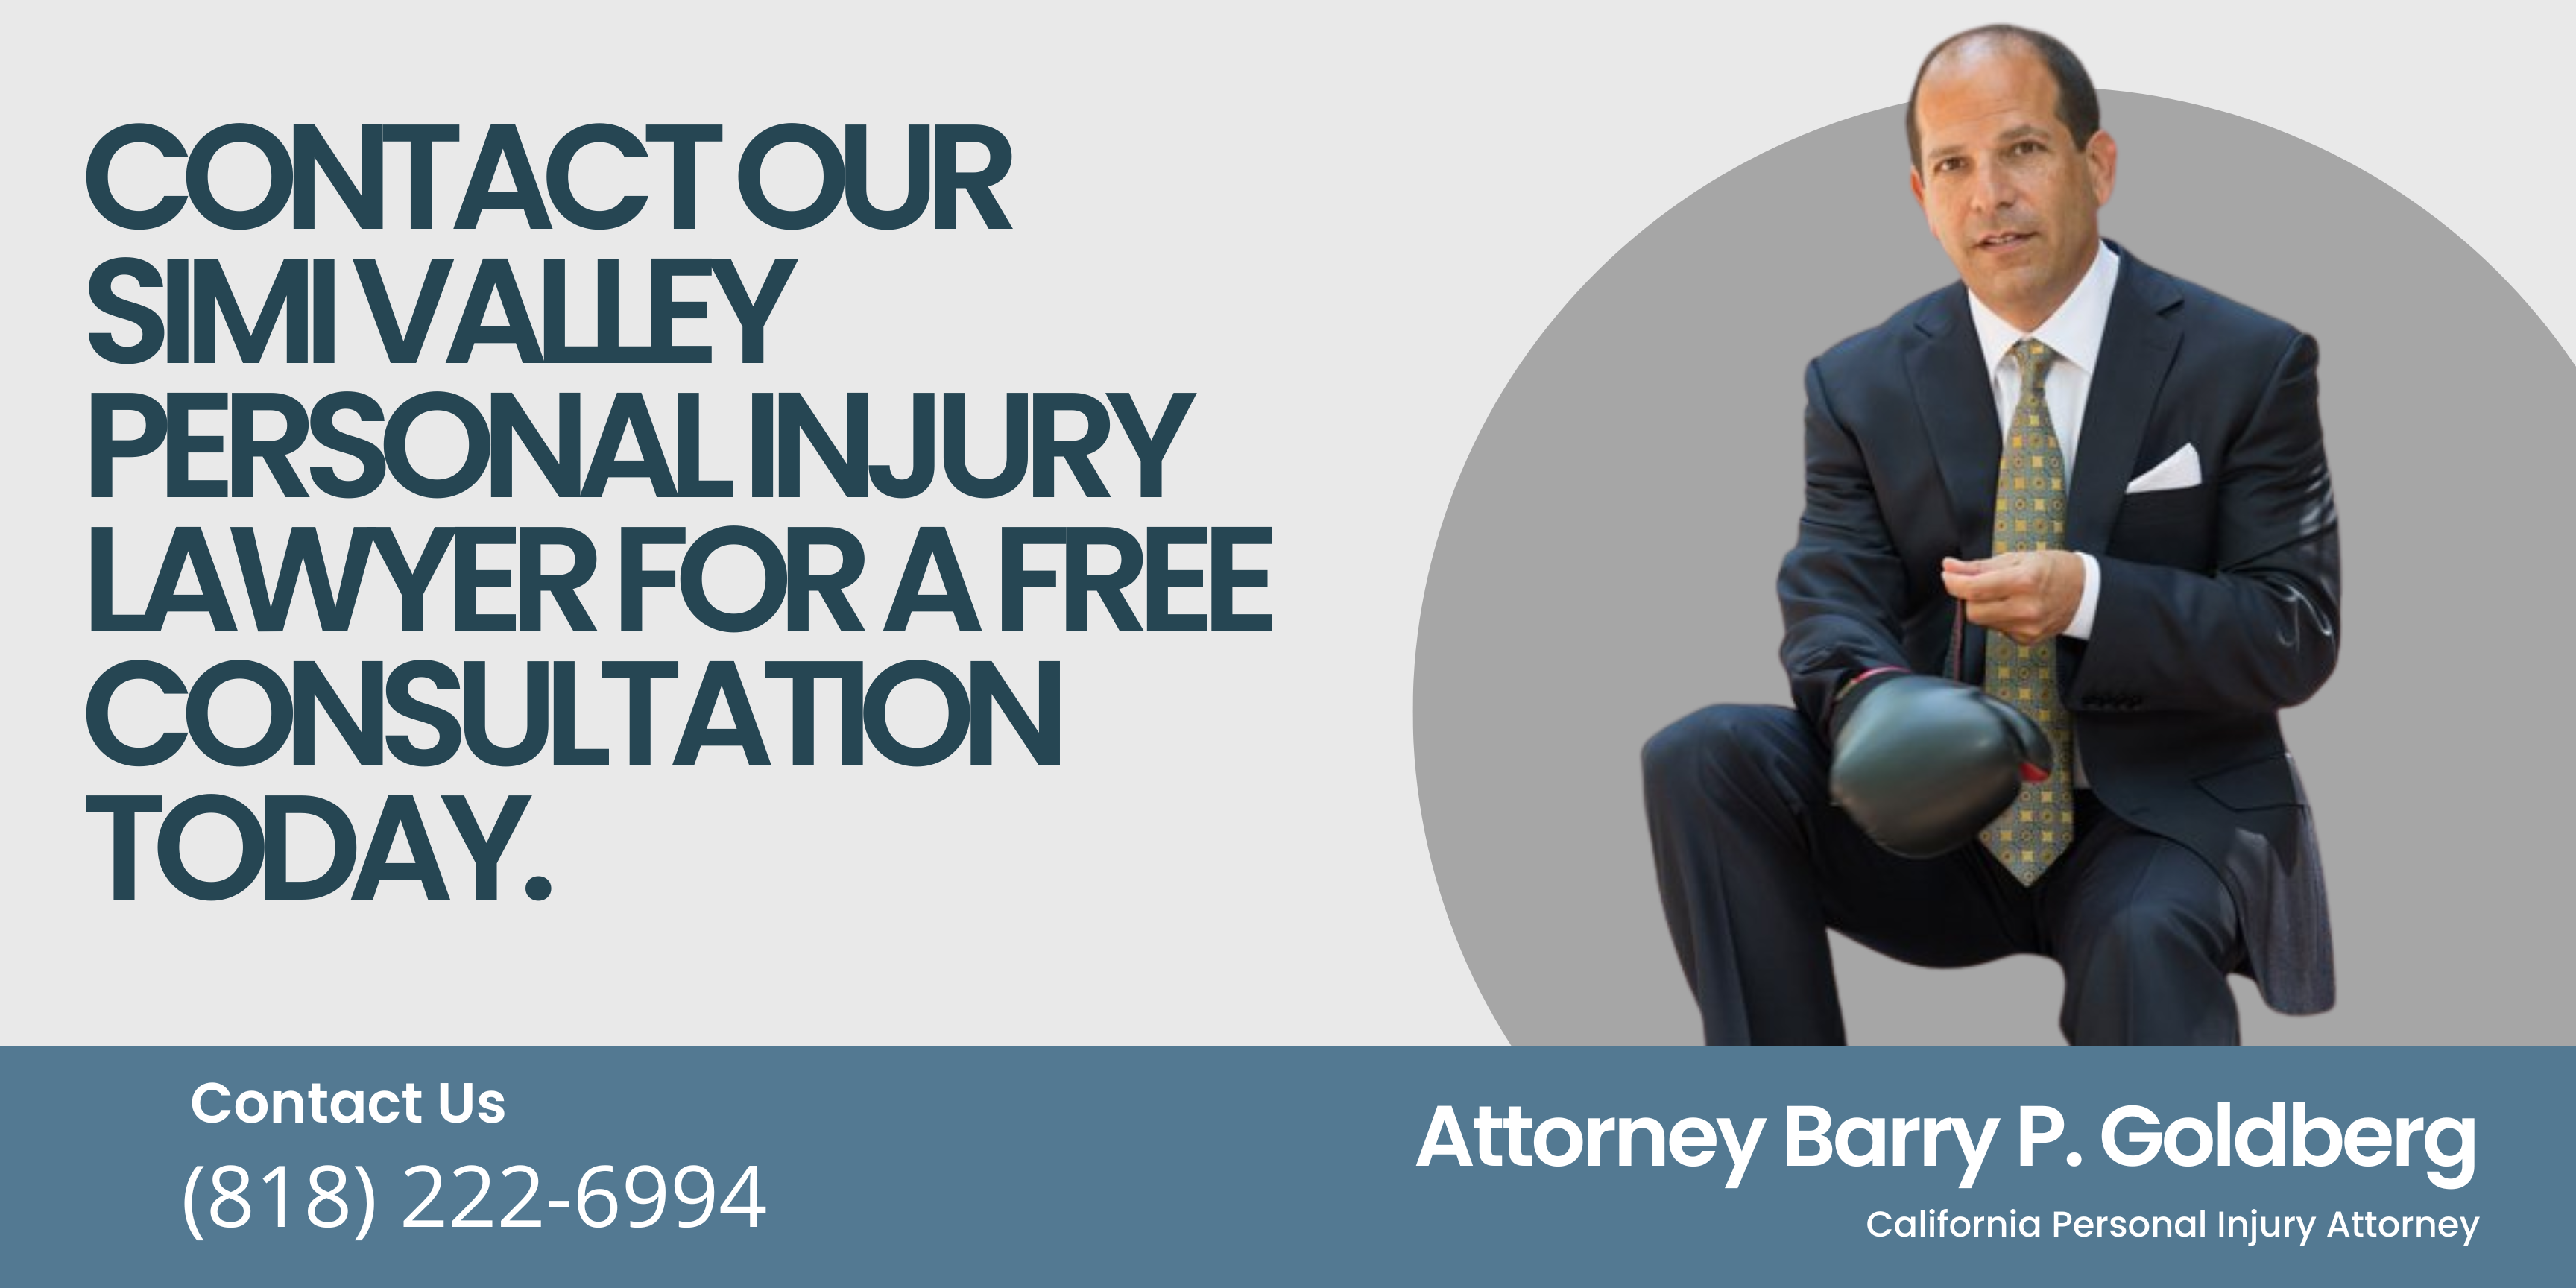 Contact Our Simi Valley Personal Injury Lawyer